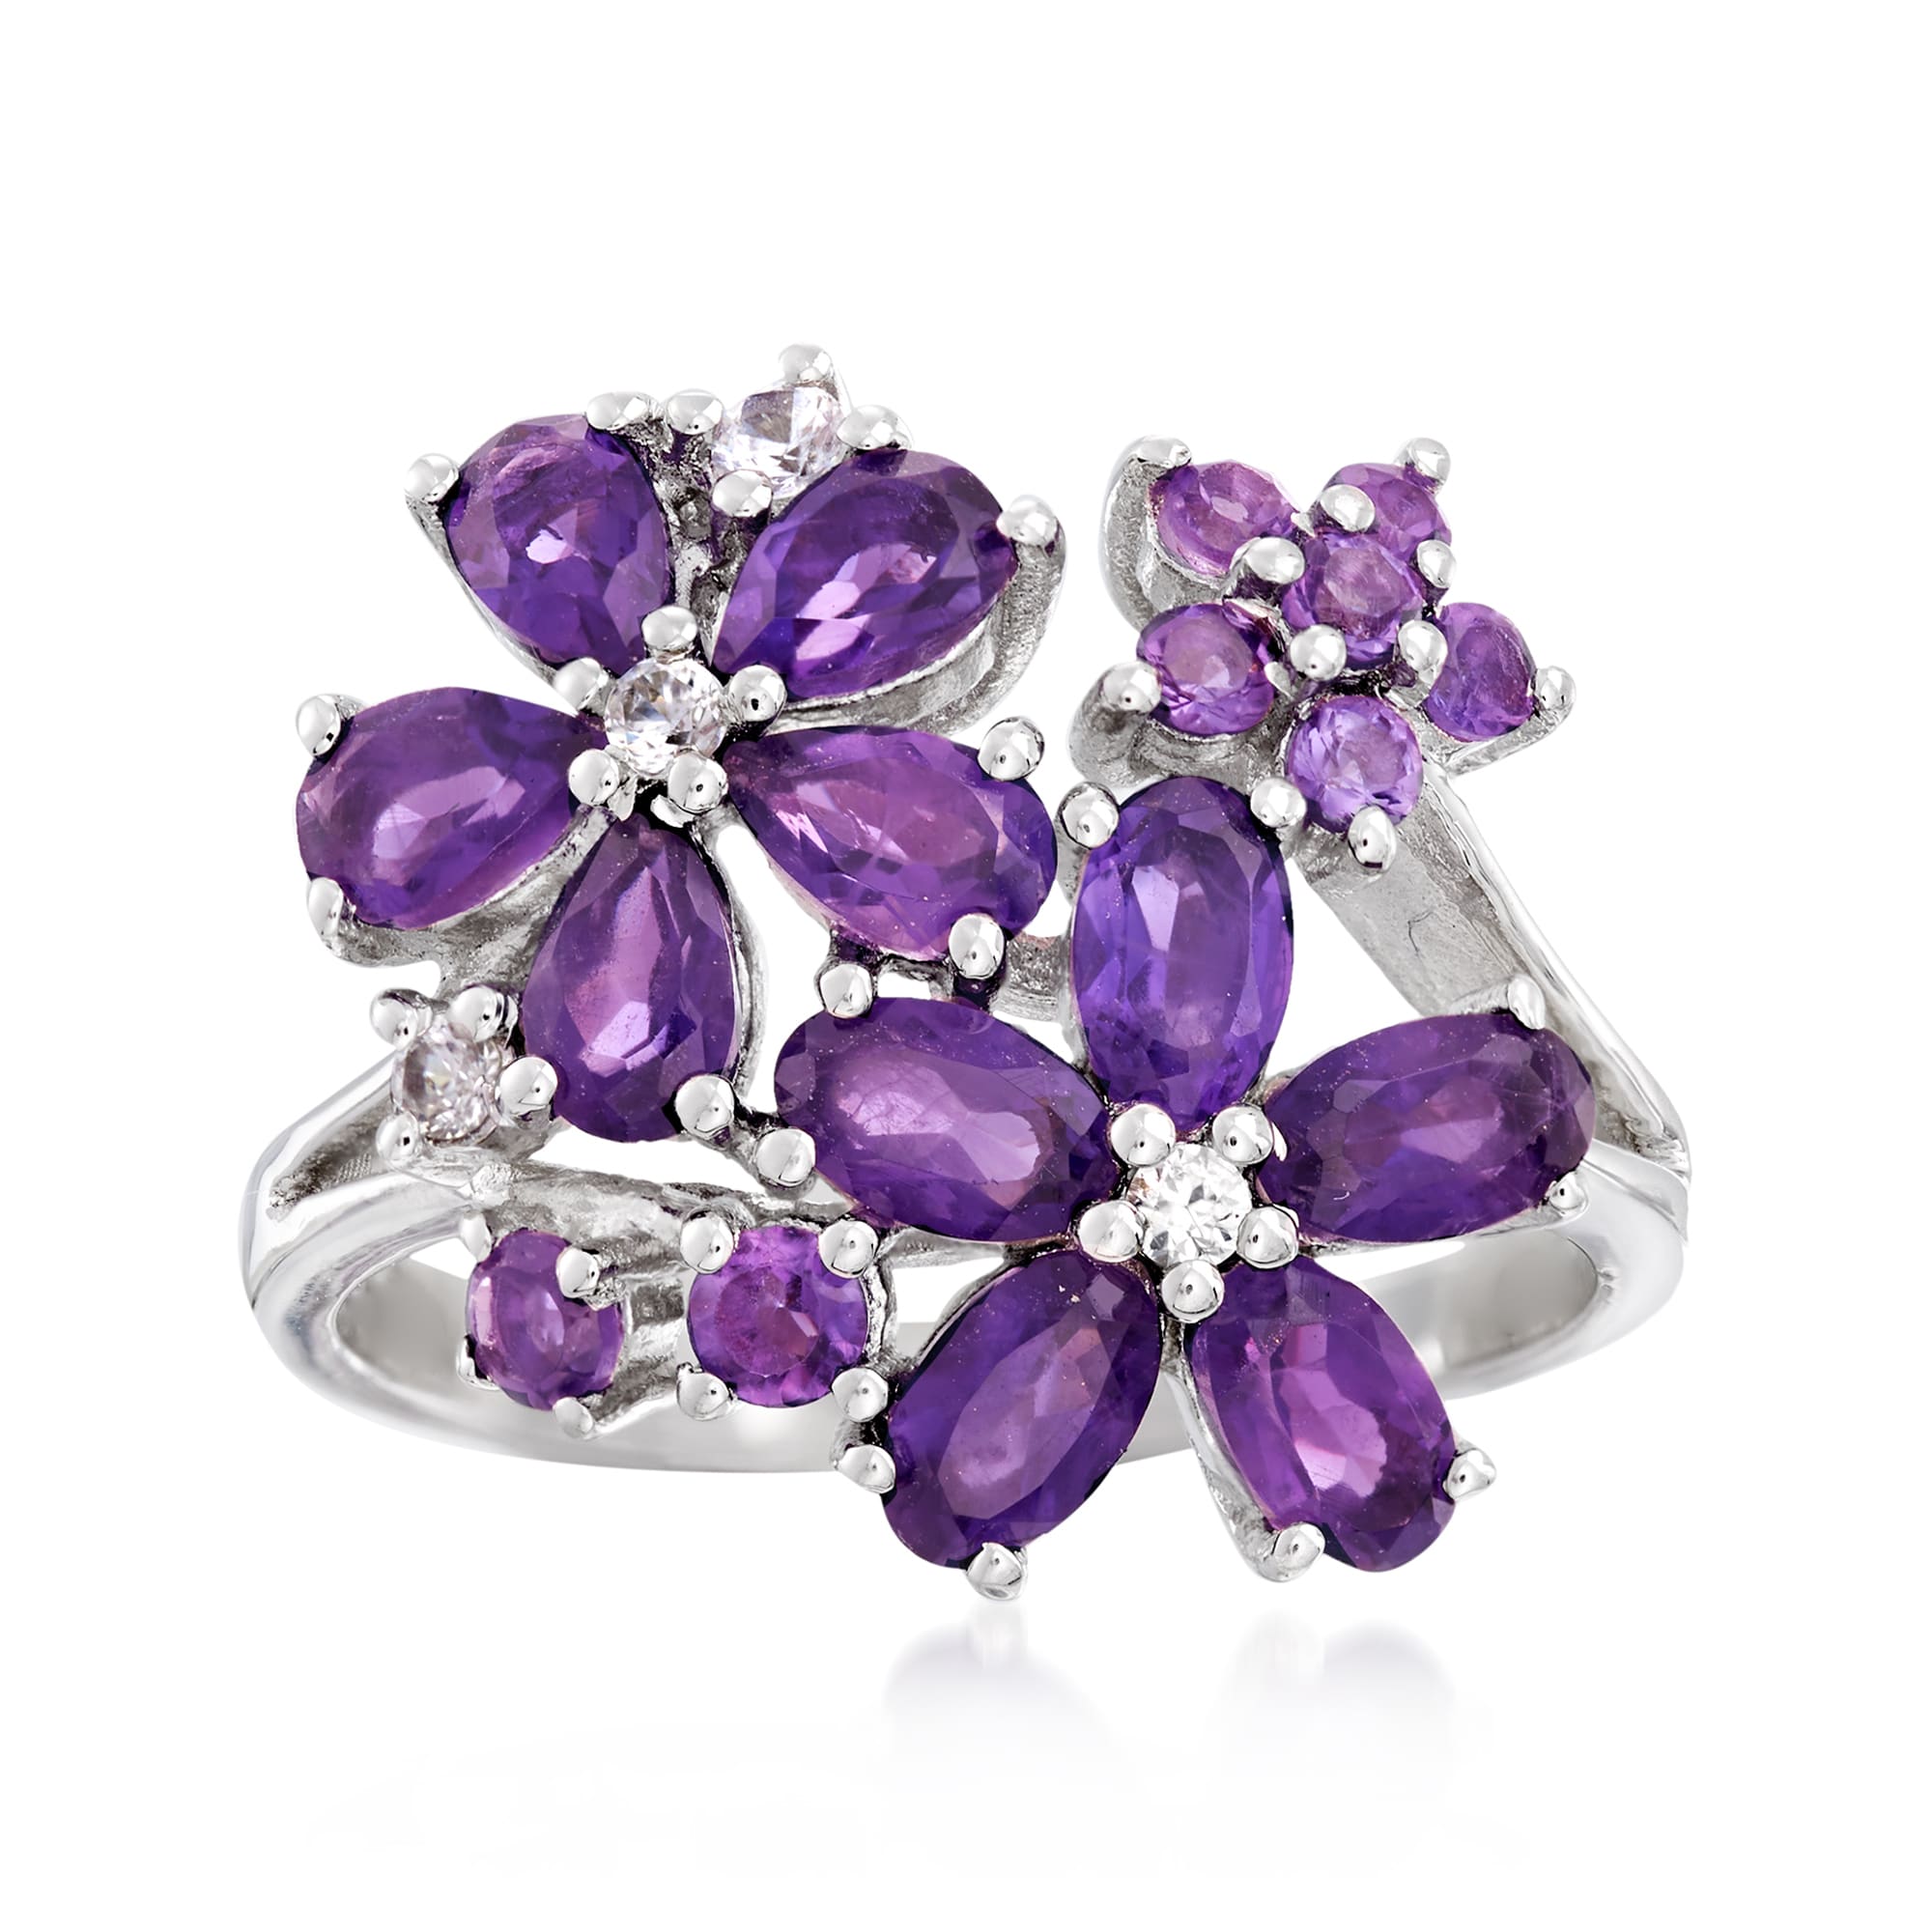 2.10 ct. t.w. Amethyst and .10 ct. t.w. White Zircon Flower Ring in ...